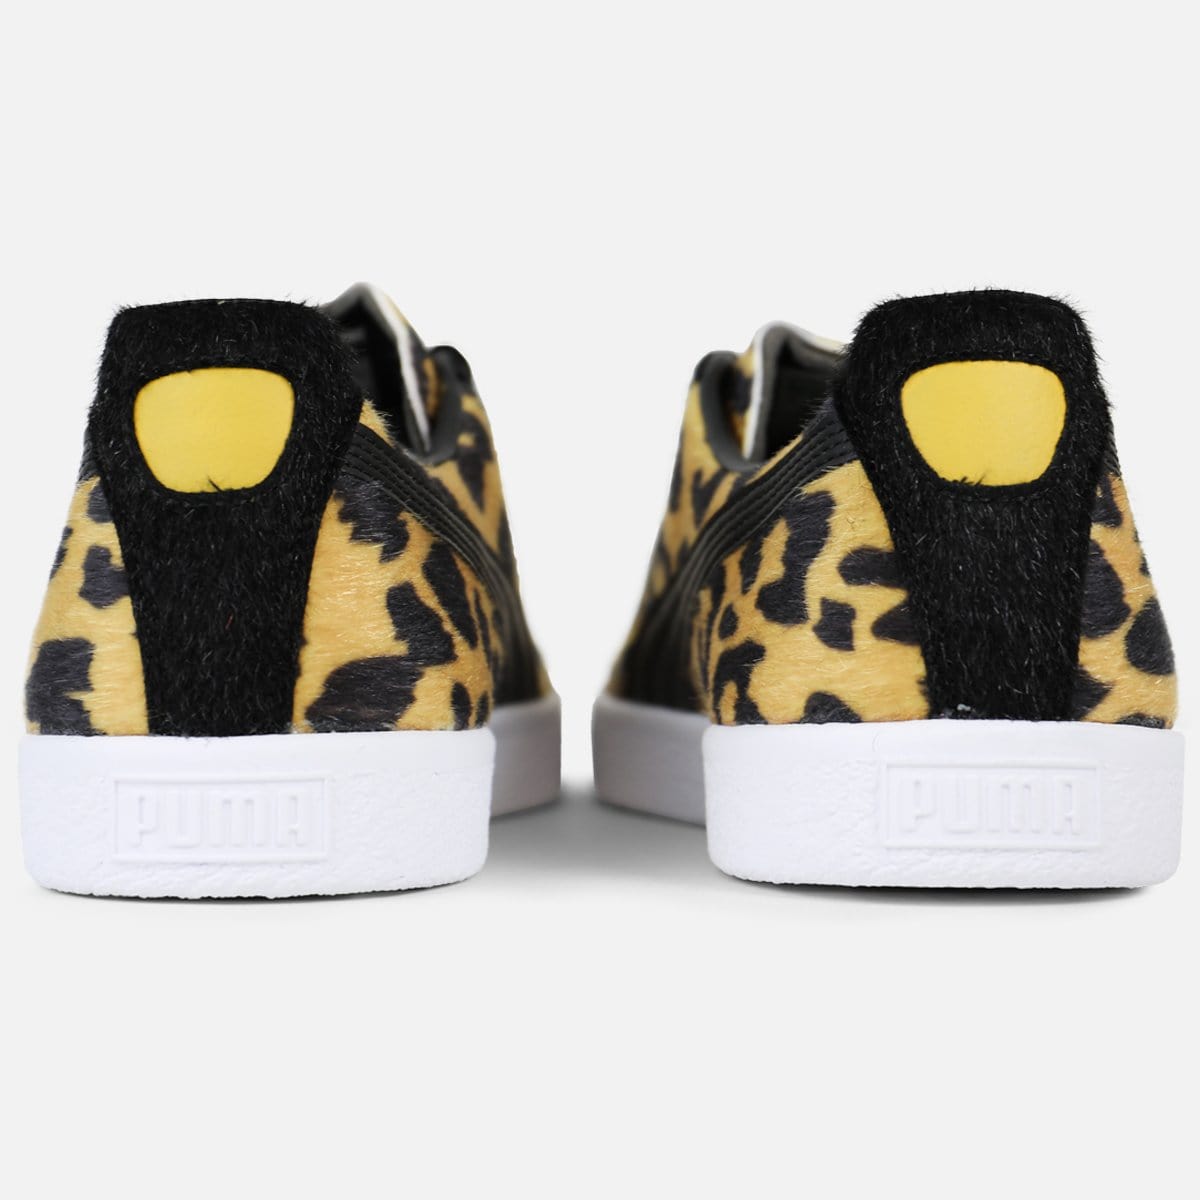 RUVilla.com is where to buy the PUMA Clyde Suits (Cheetah)!